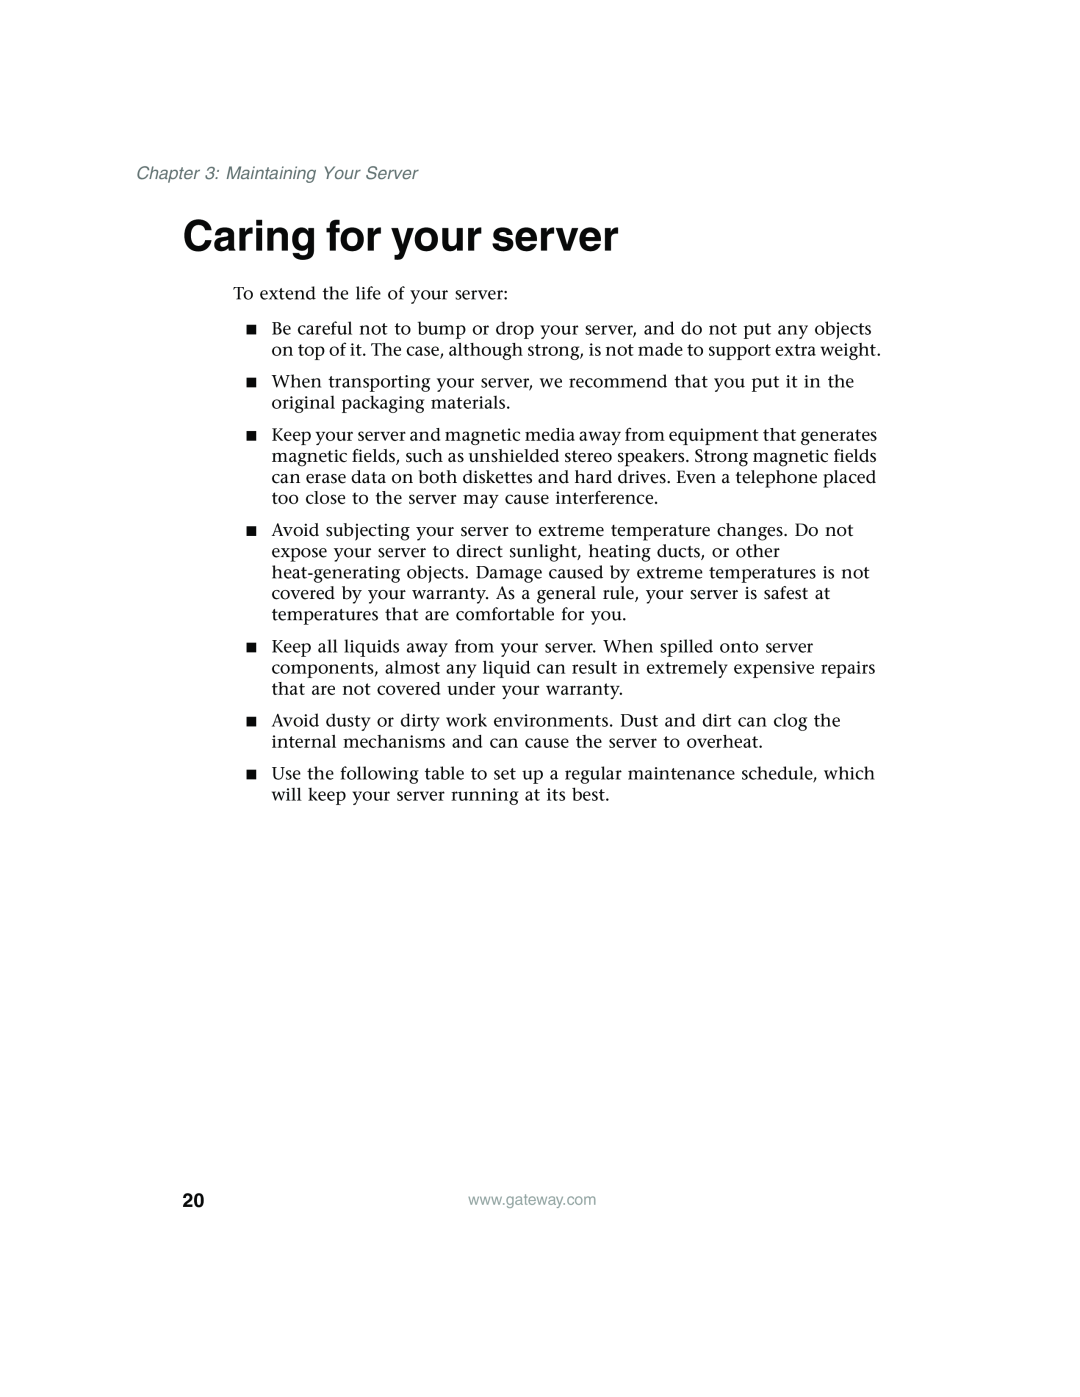 Gateway 960 manual Caring for your server, Maintaining Your Server 